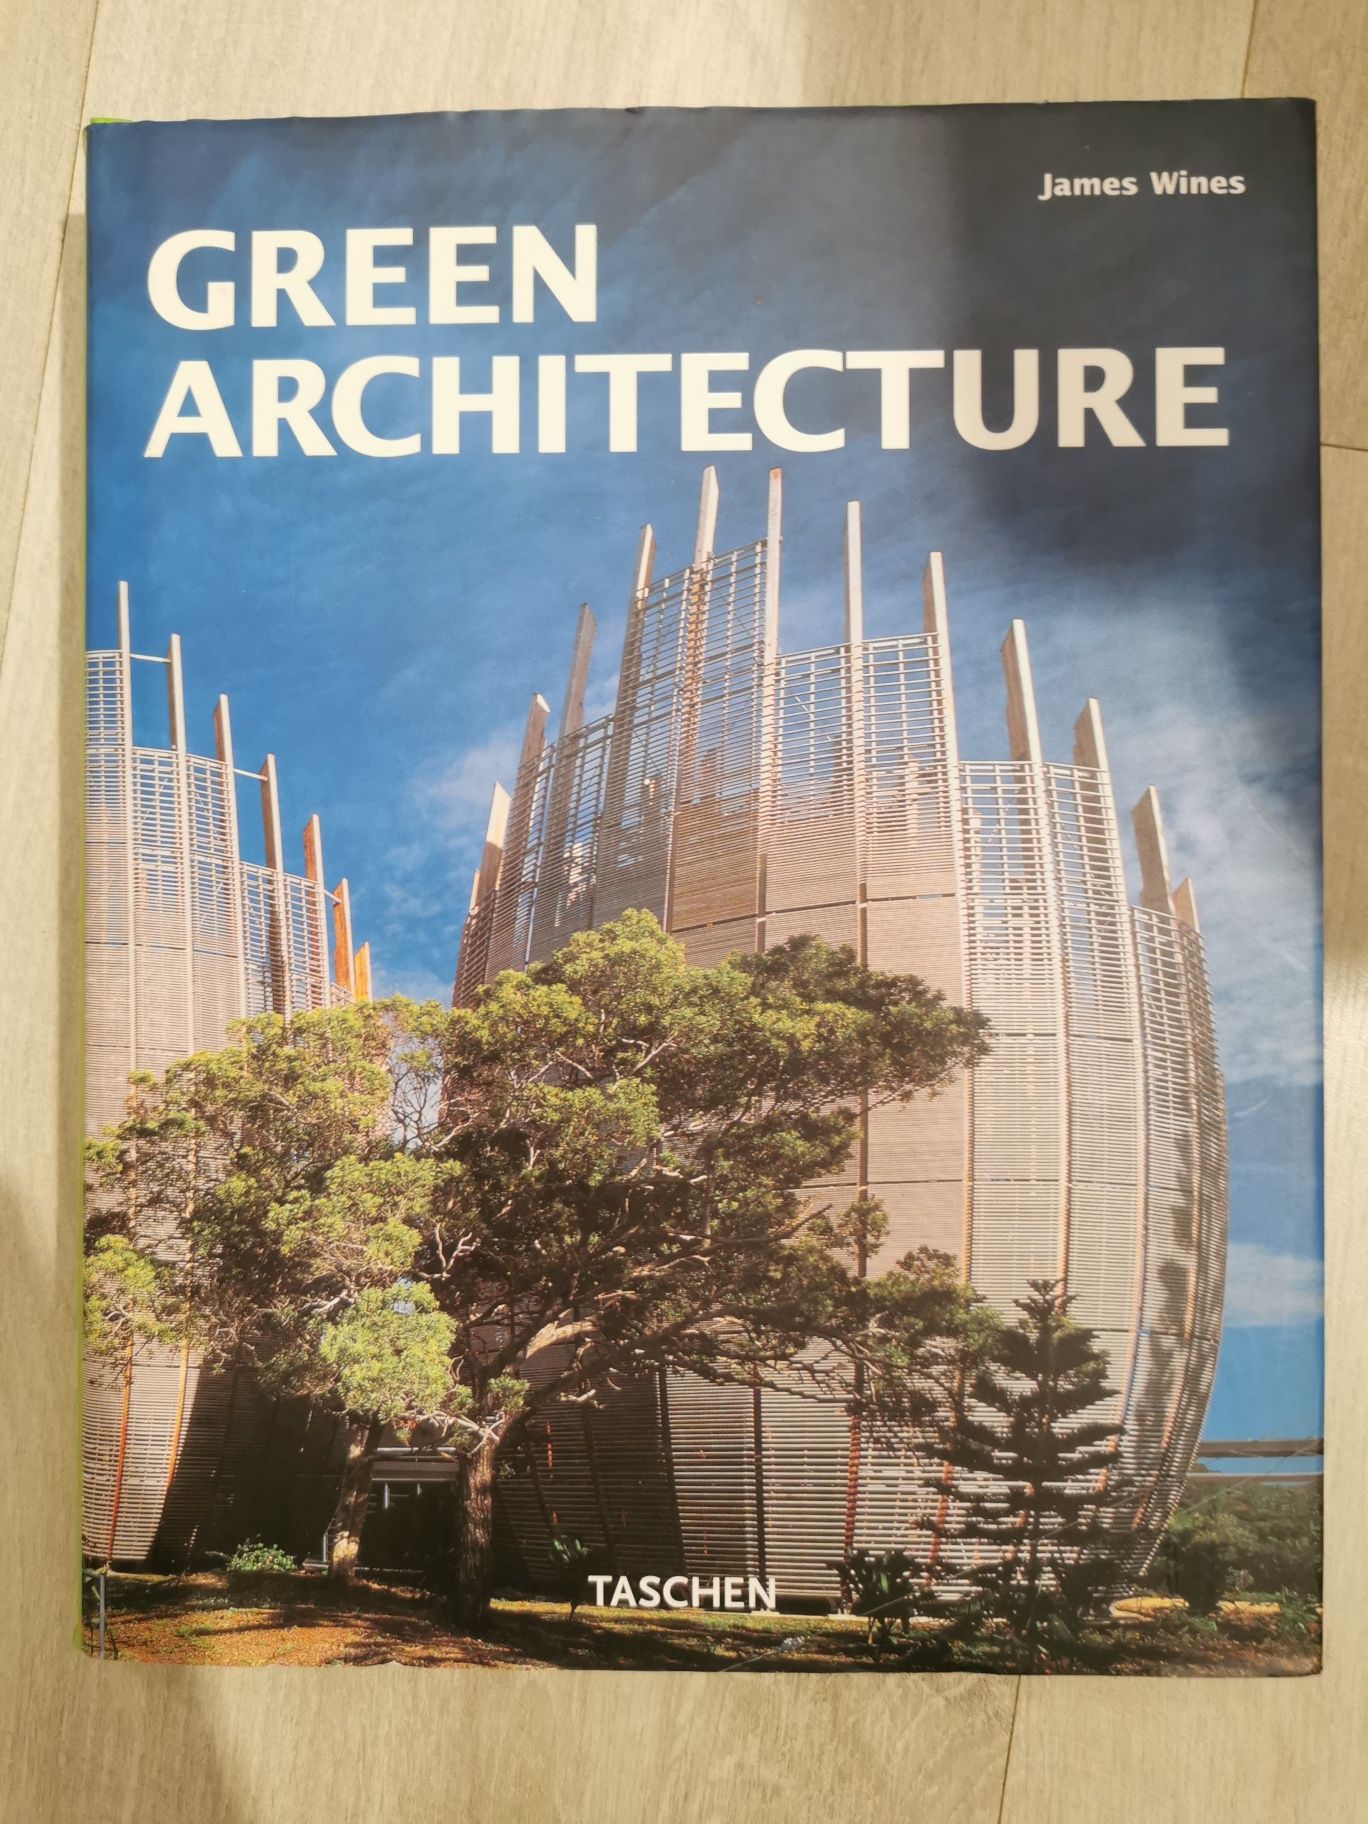 James Wines Green Architecture